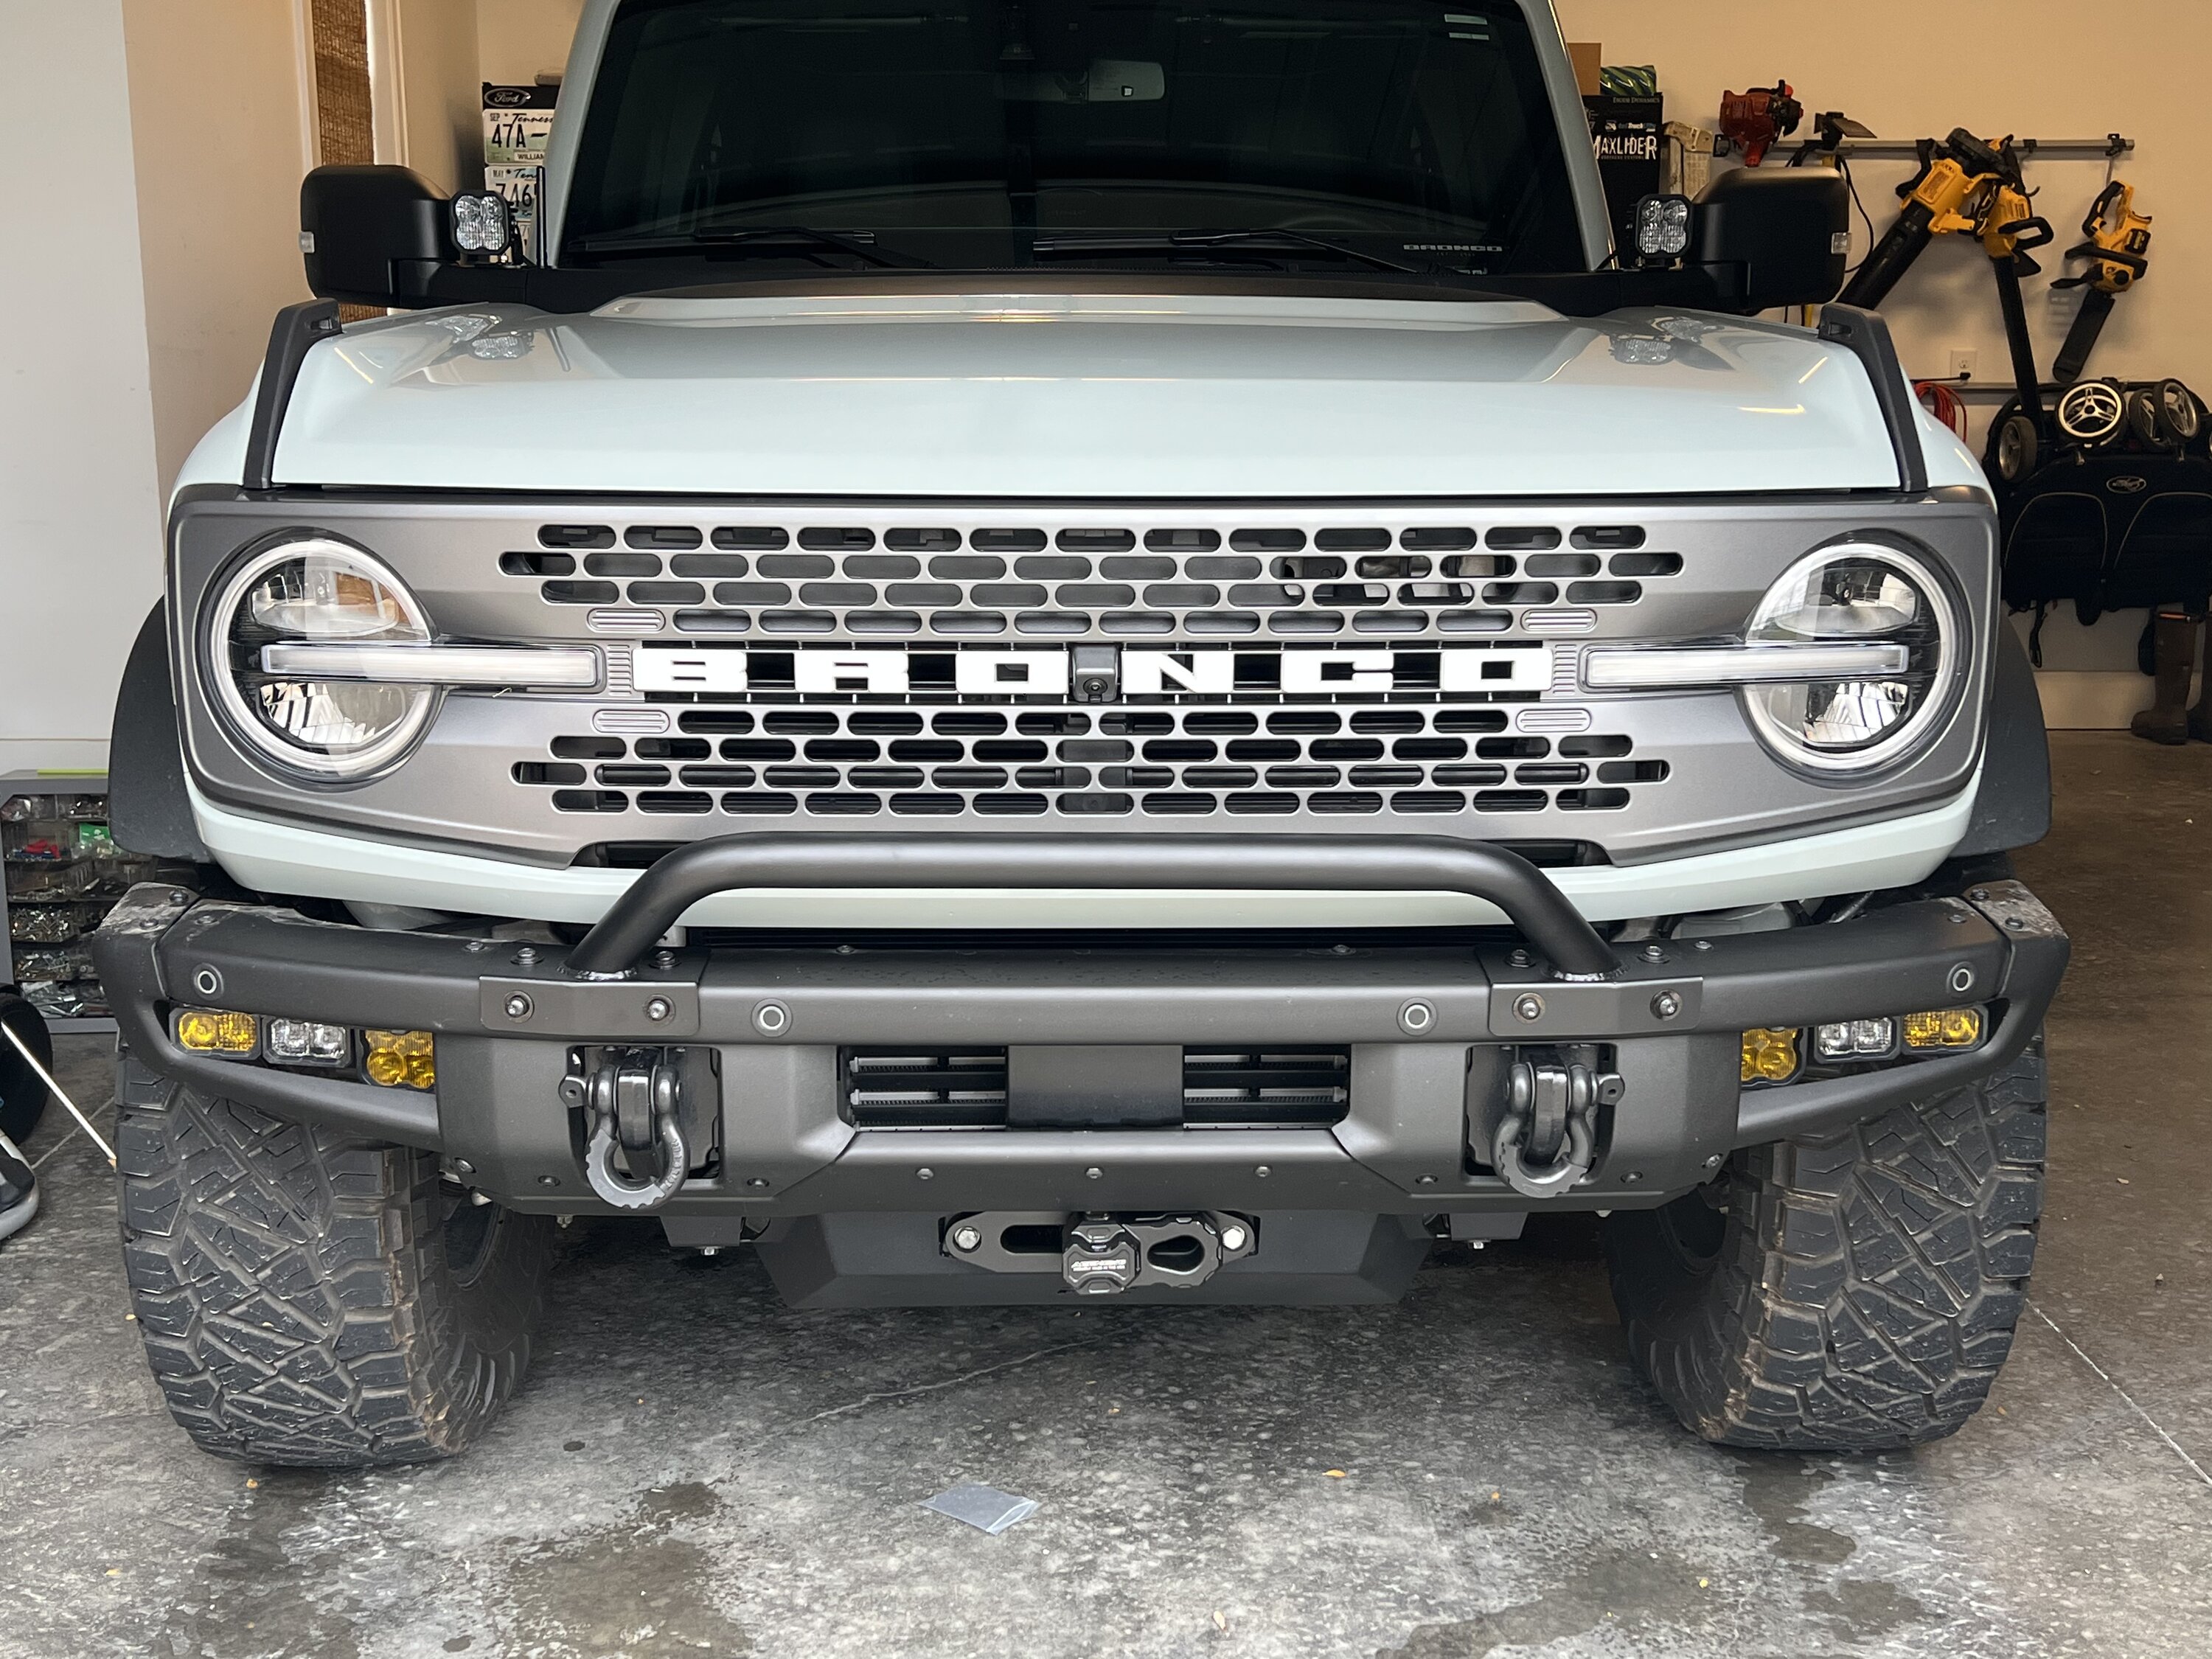 Ford Bronco Unsure on which Winch Mount is right for me 425EB023-99E5-4121-B404-3D92DC25BB32